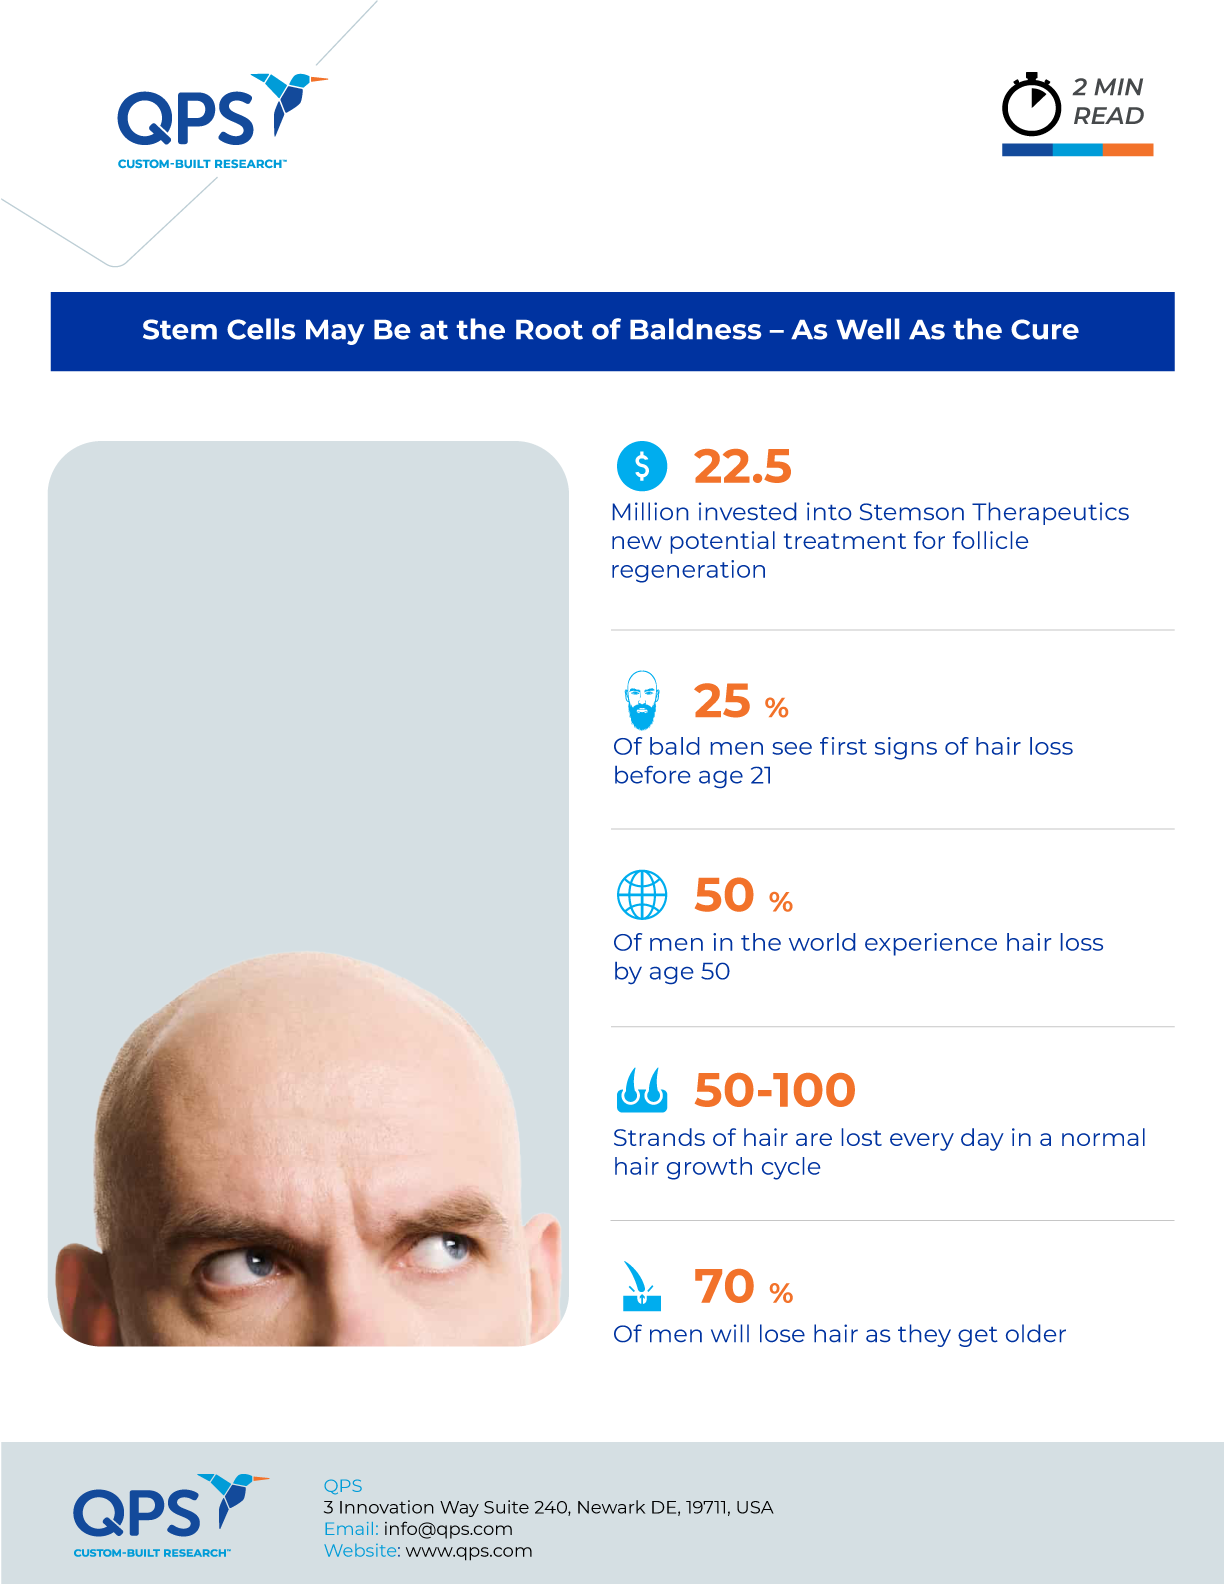 Stem Cells May Be at the Root of Baldness - As Well As the Cure